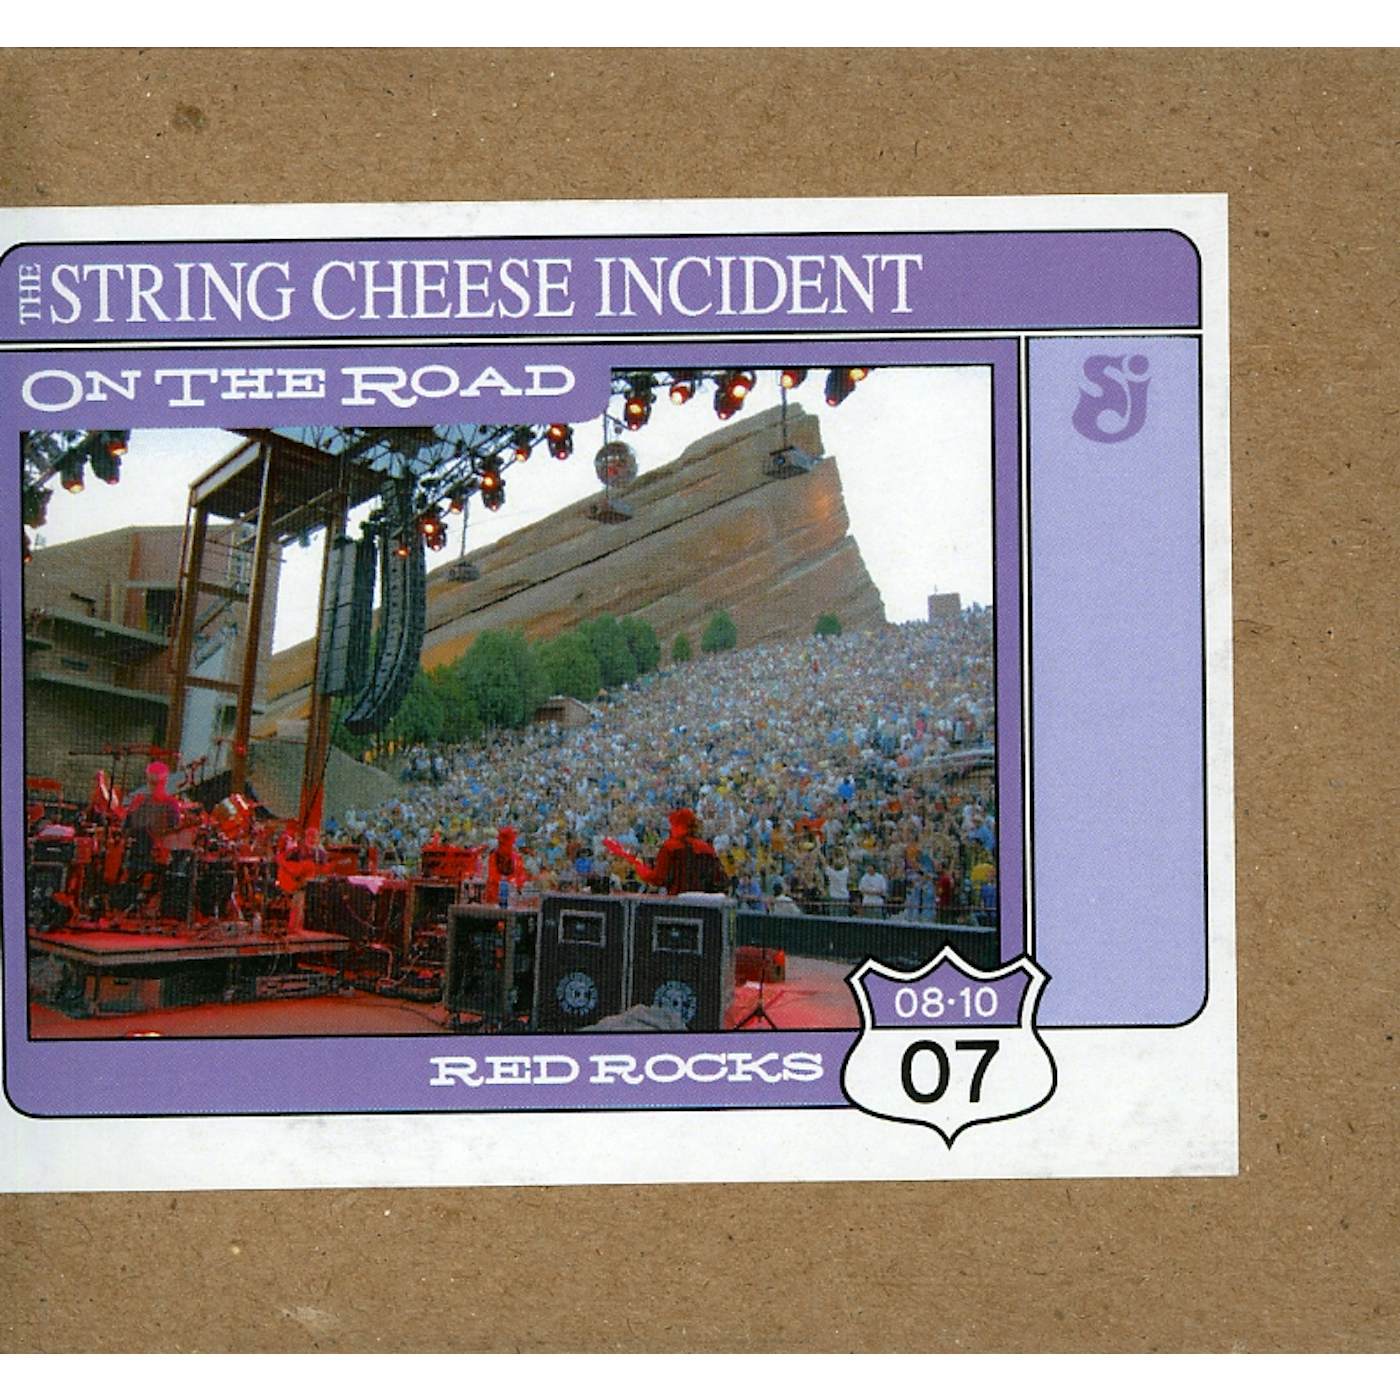 The String Cheese Incident OTR: MORRISON CO 8-10-07 CD